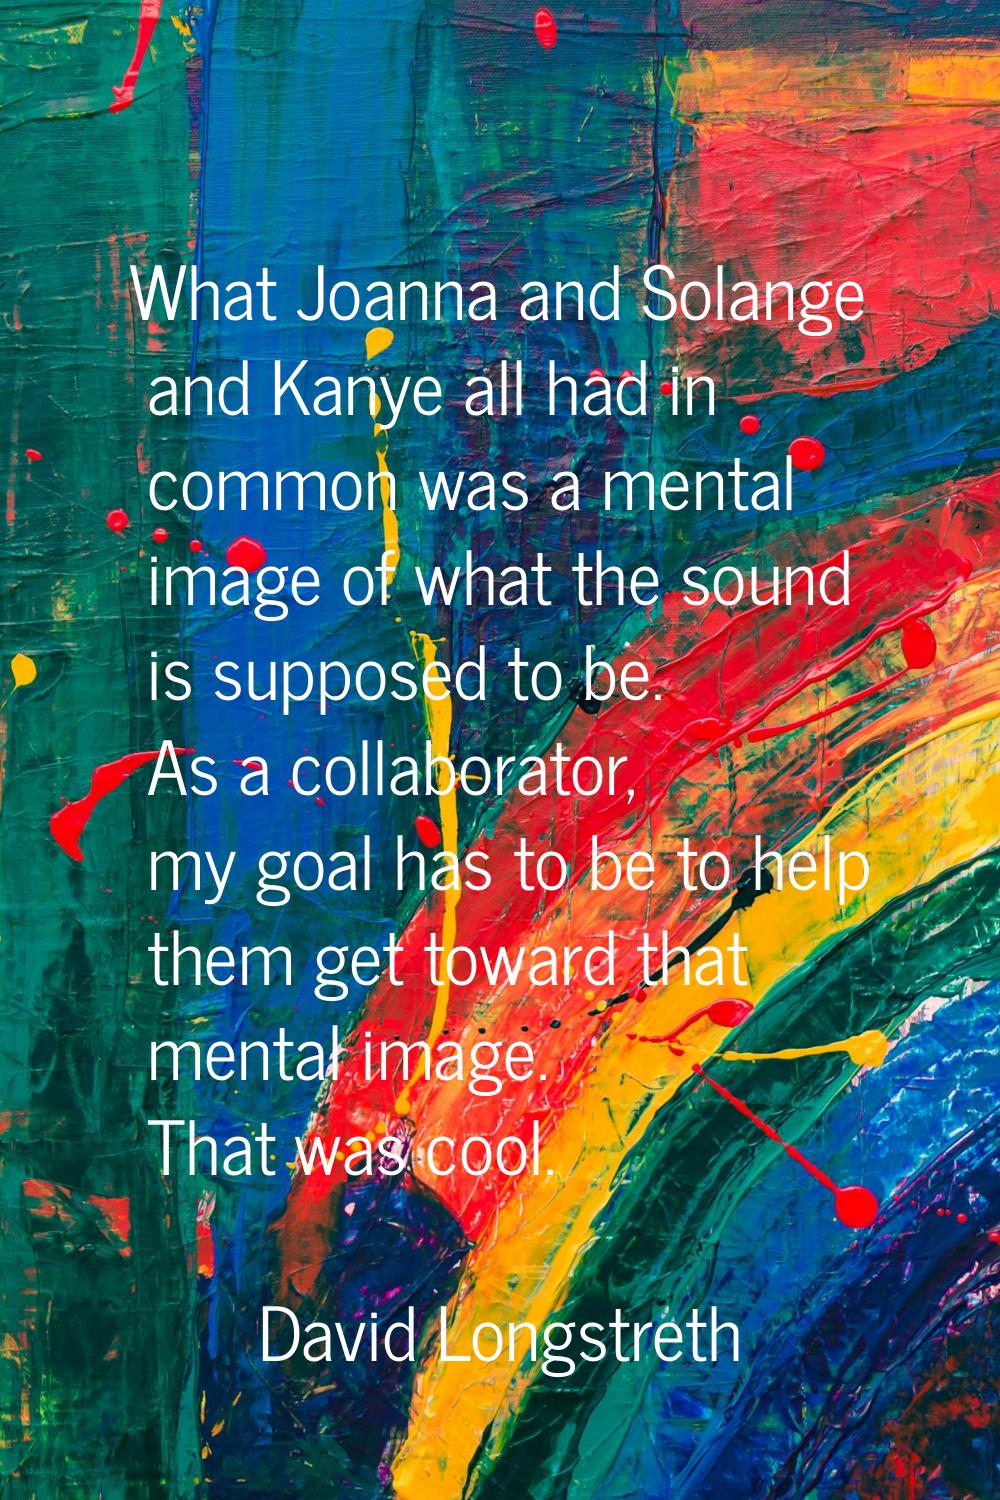 What Joanna and Solange and Kanye all had in common was a mental image of what the sound is suppose